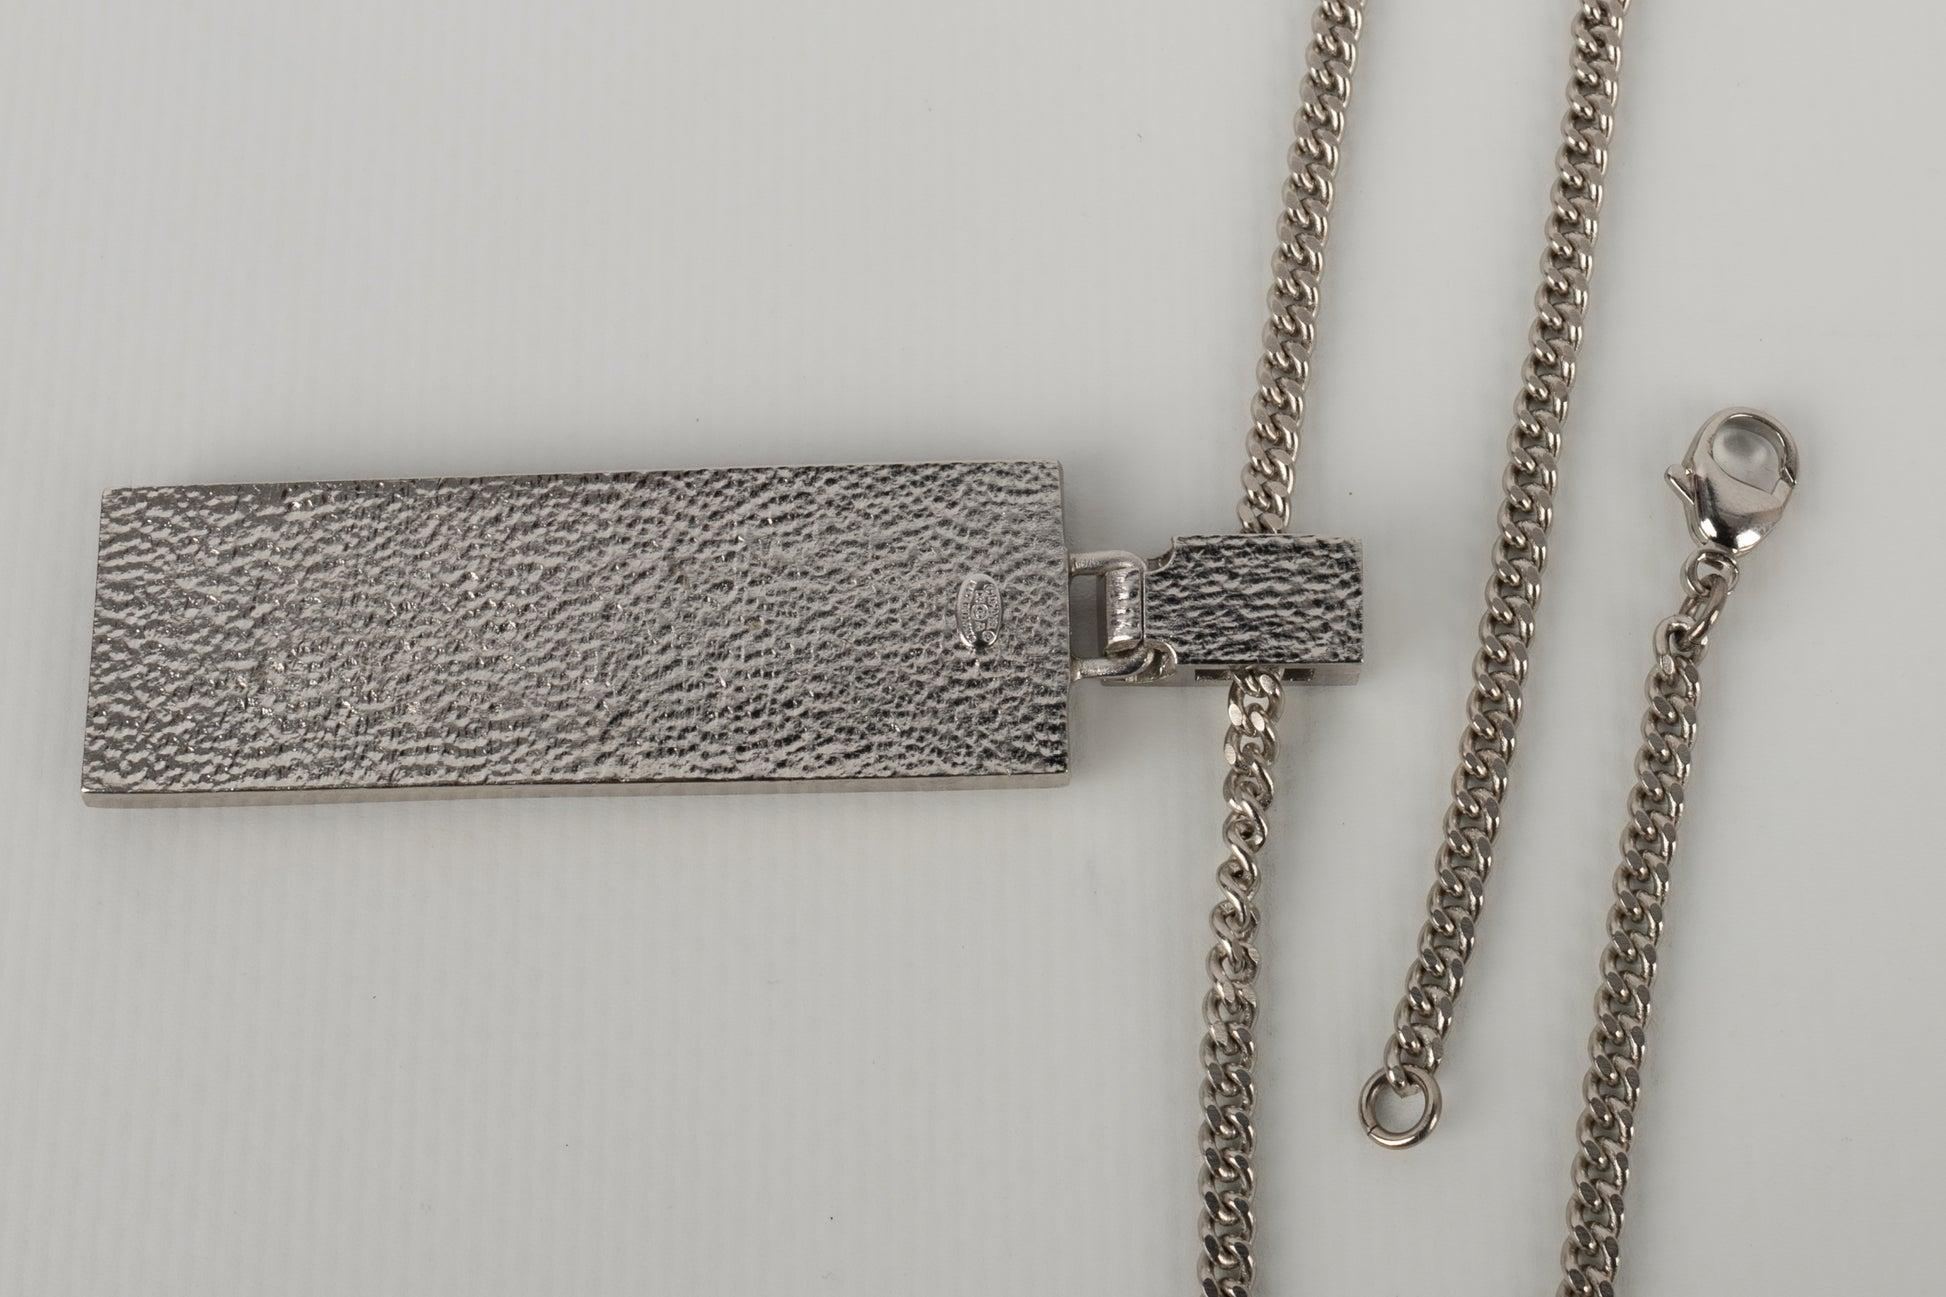 Chanel Silvery Metal Necklace with a Swarovski Rhinestone Pendant, Fall 2003 For Sale 2